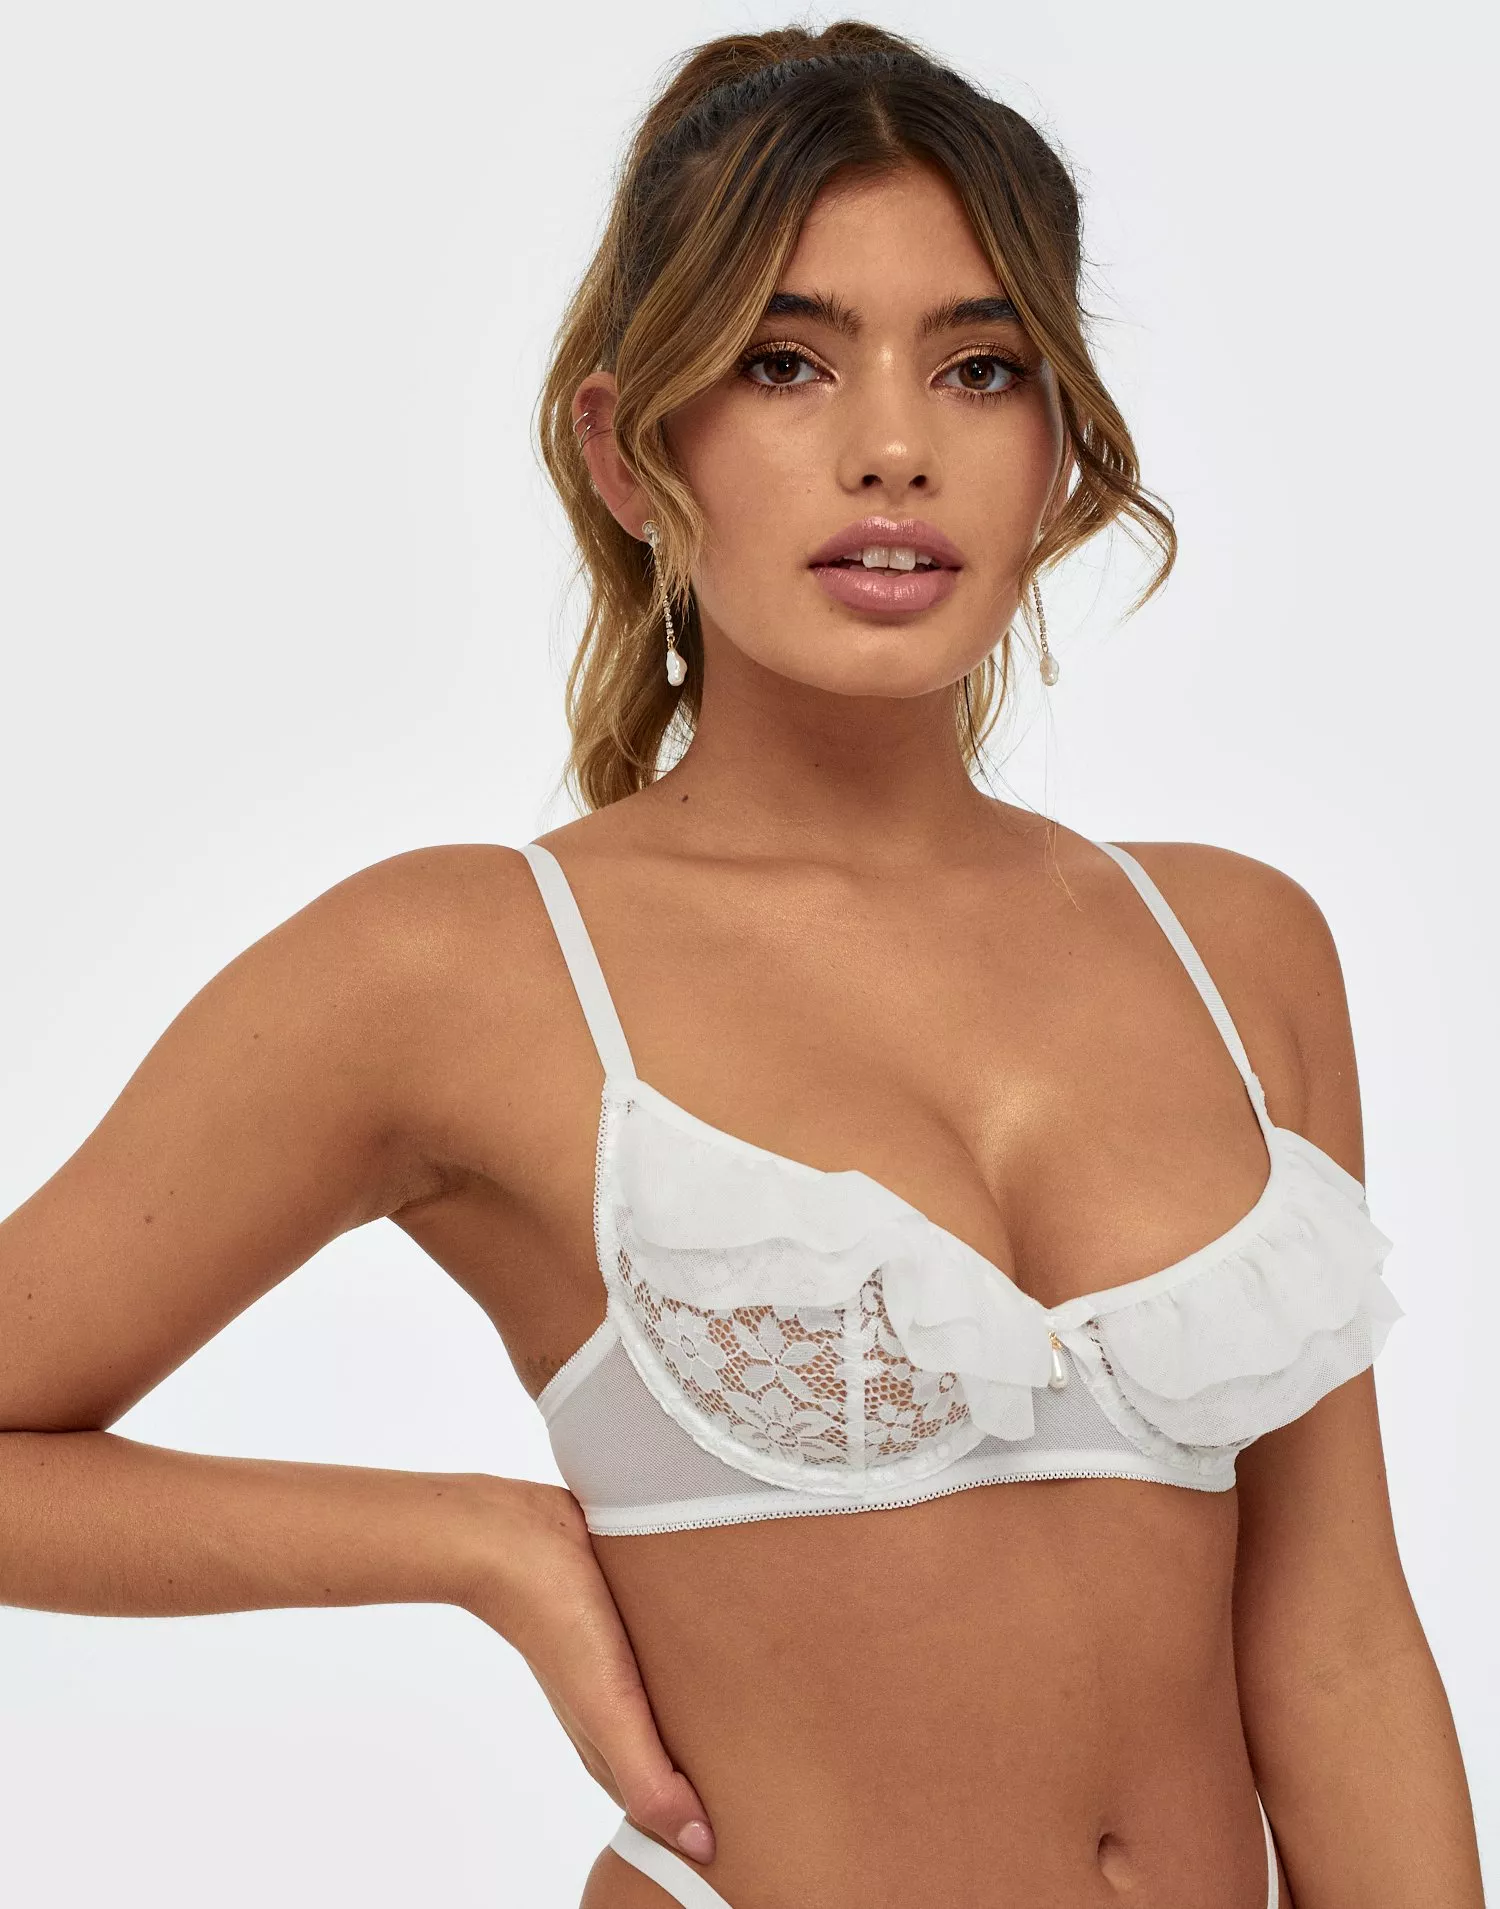 Angie recycled underwired bra in lace white Dorina